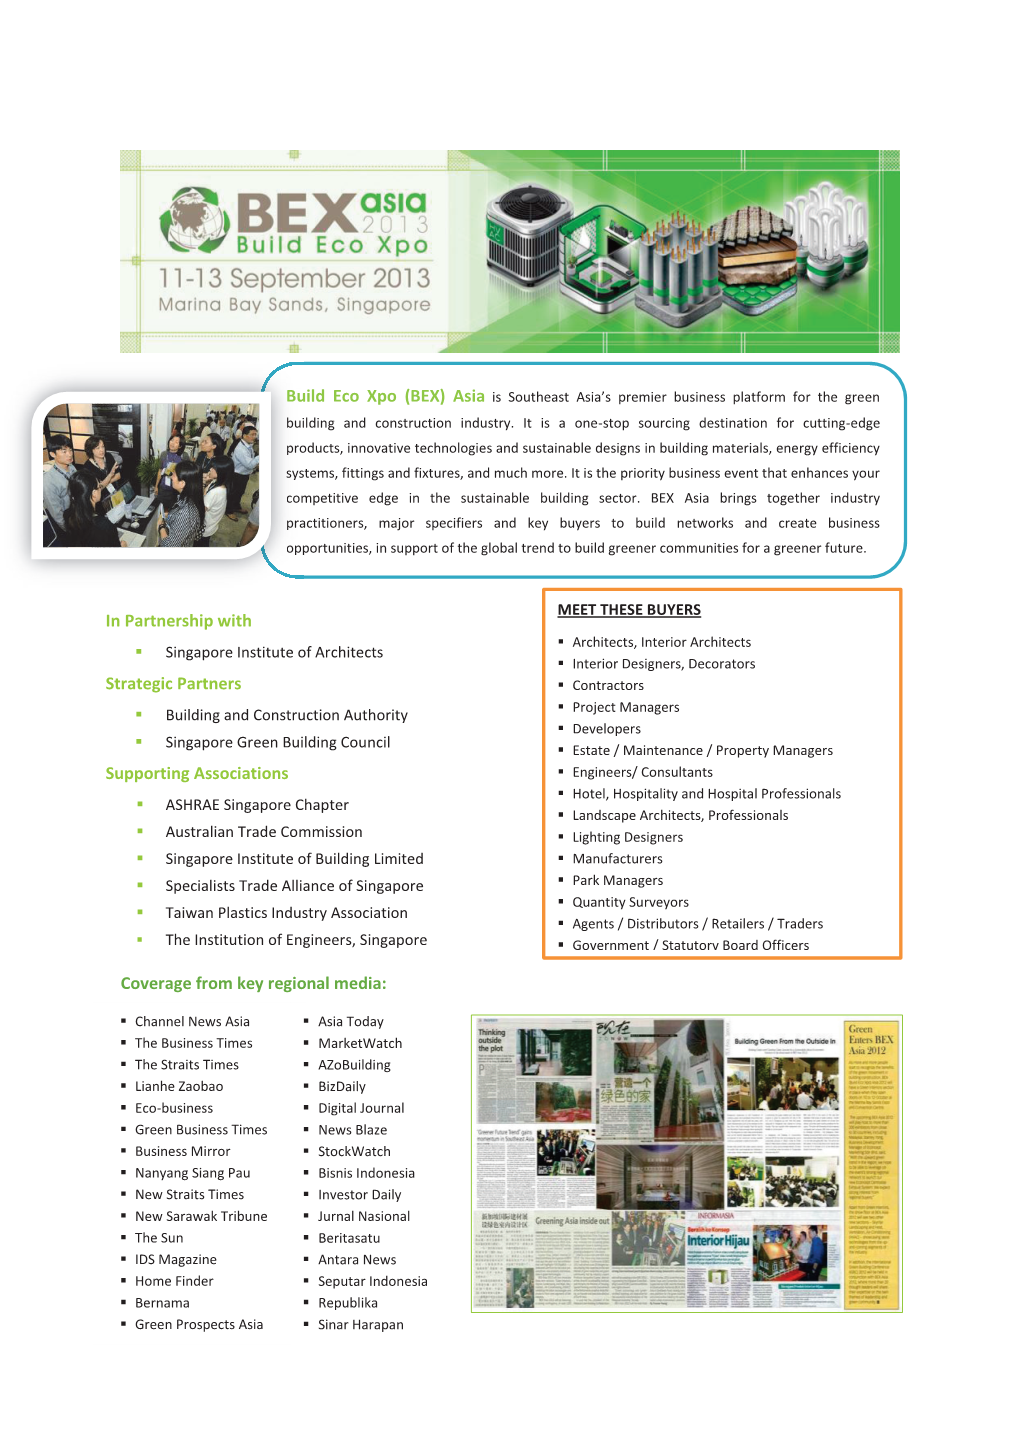 Build Eco Xpo (BEX) Asia Bu in Partnership With